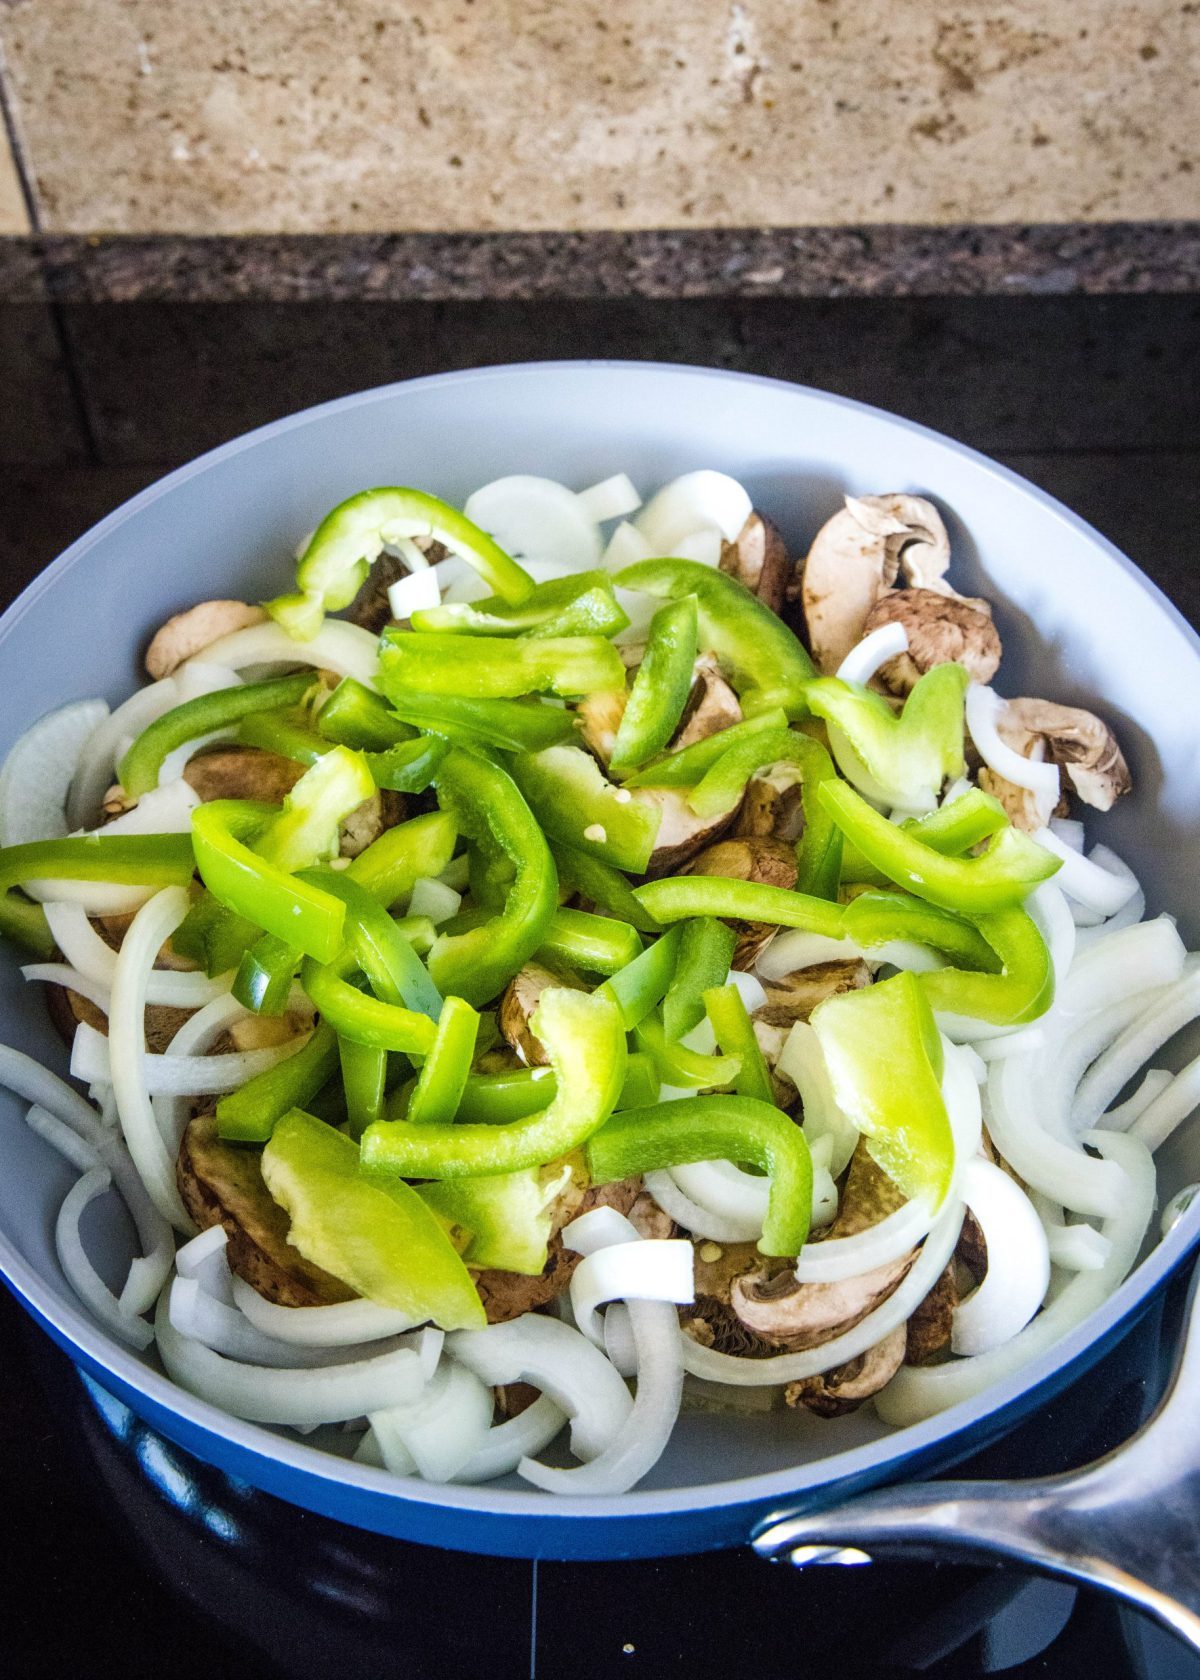 A skillet full of uncooked mushrooms, onions, and green bell pepper